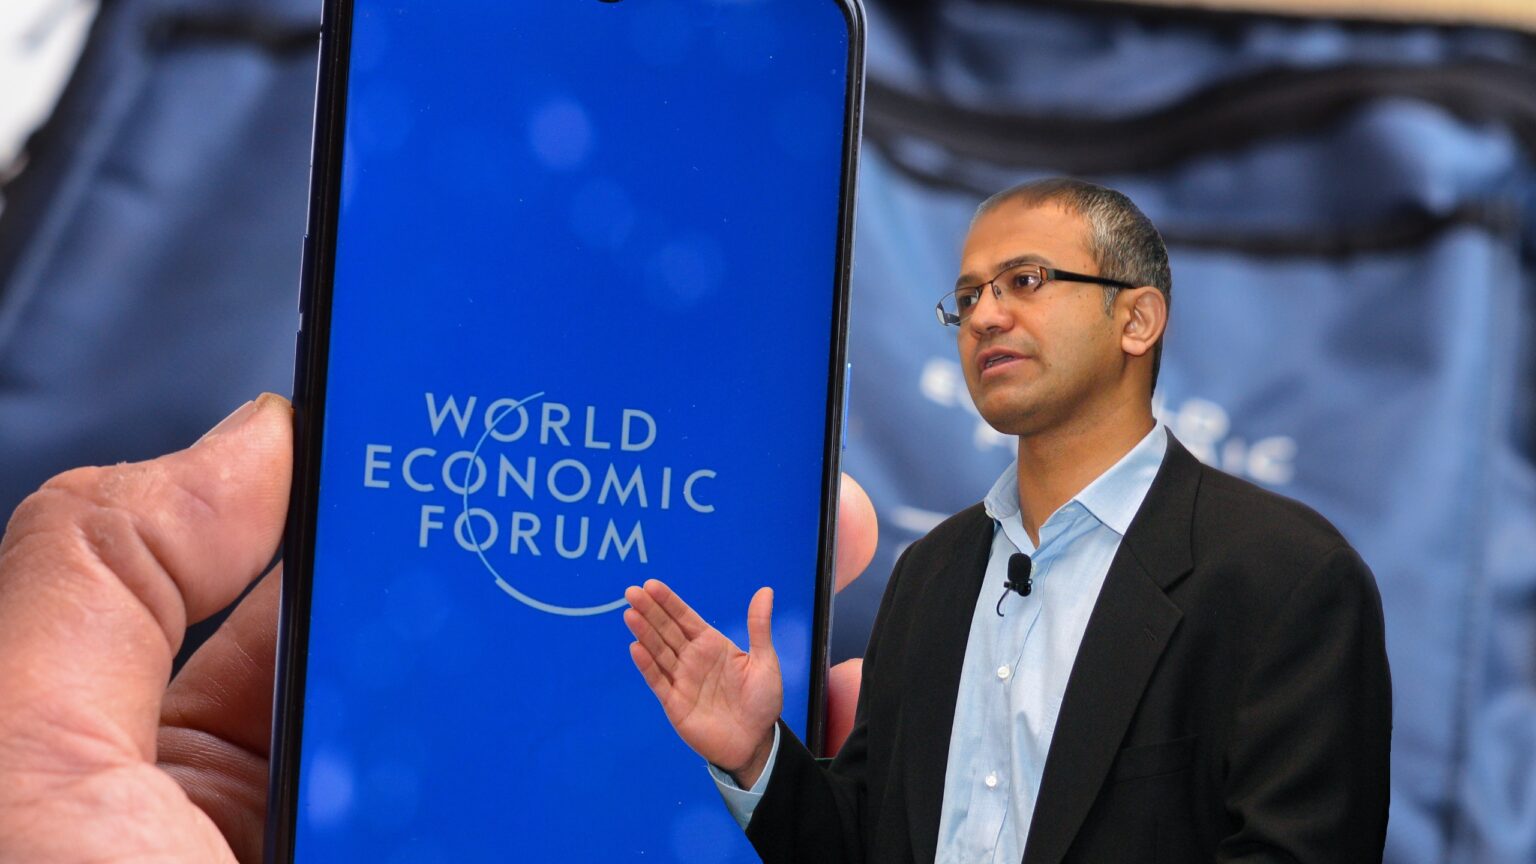 Microsoft CEO Talked Up Metaverse at WEF as Firm Shut Down VR Metaverse Unit